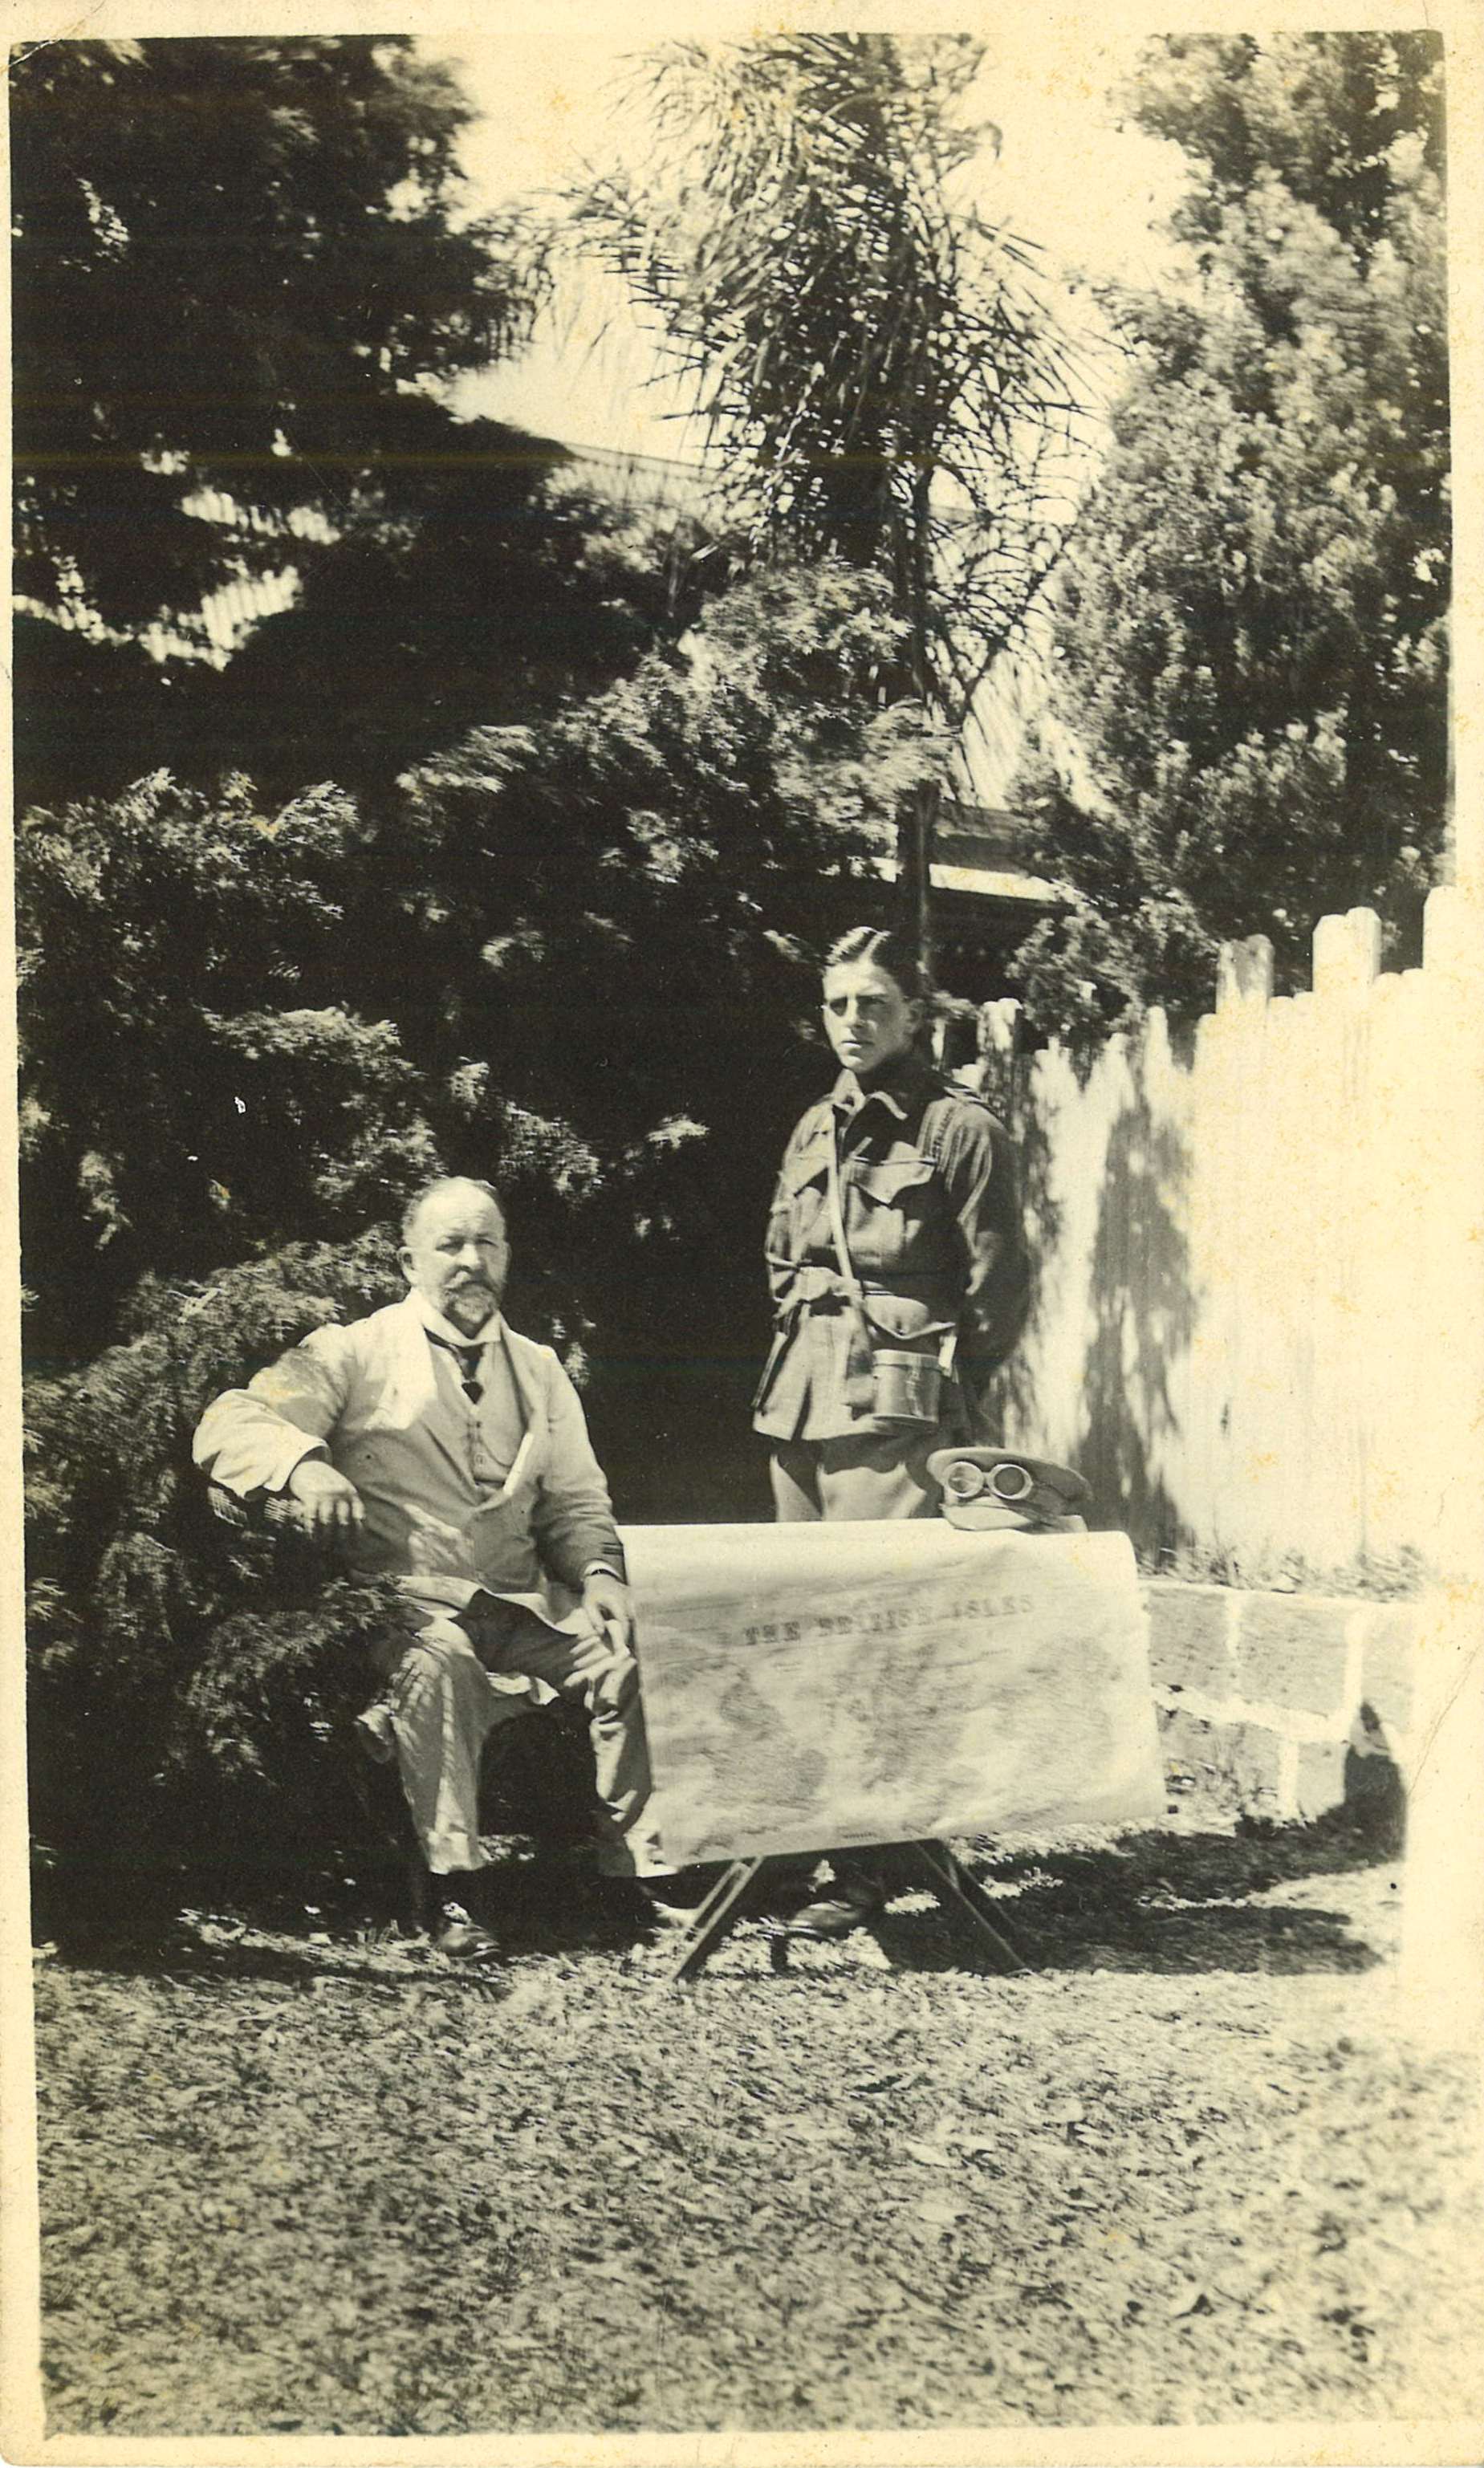 Stanley Nicolle and Robert Barnet in the grounds of the Nicolle house 
Esperanza at Primbee, near Wollongong, March 1916 / Robert Barnet